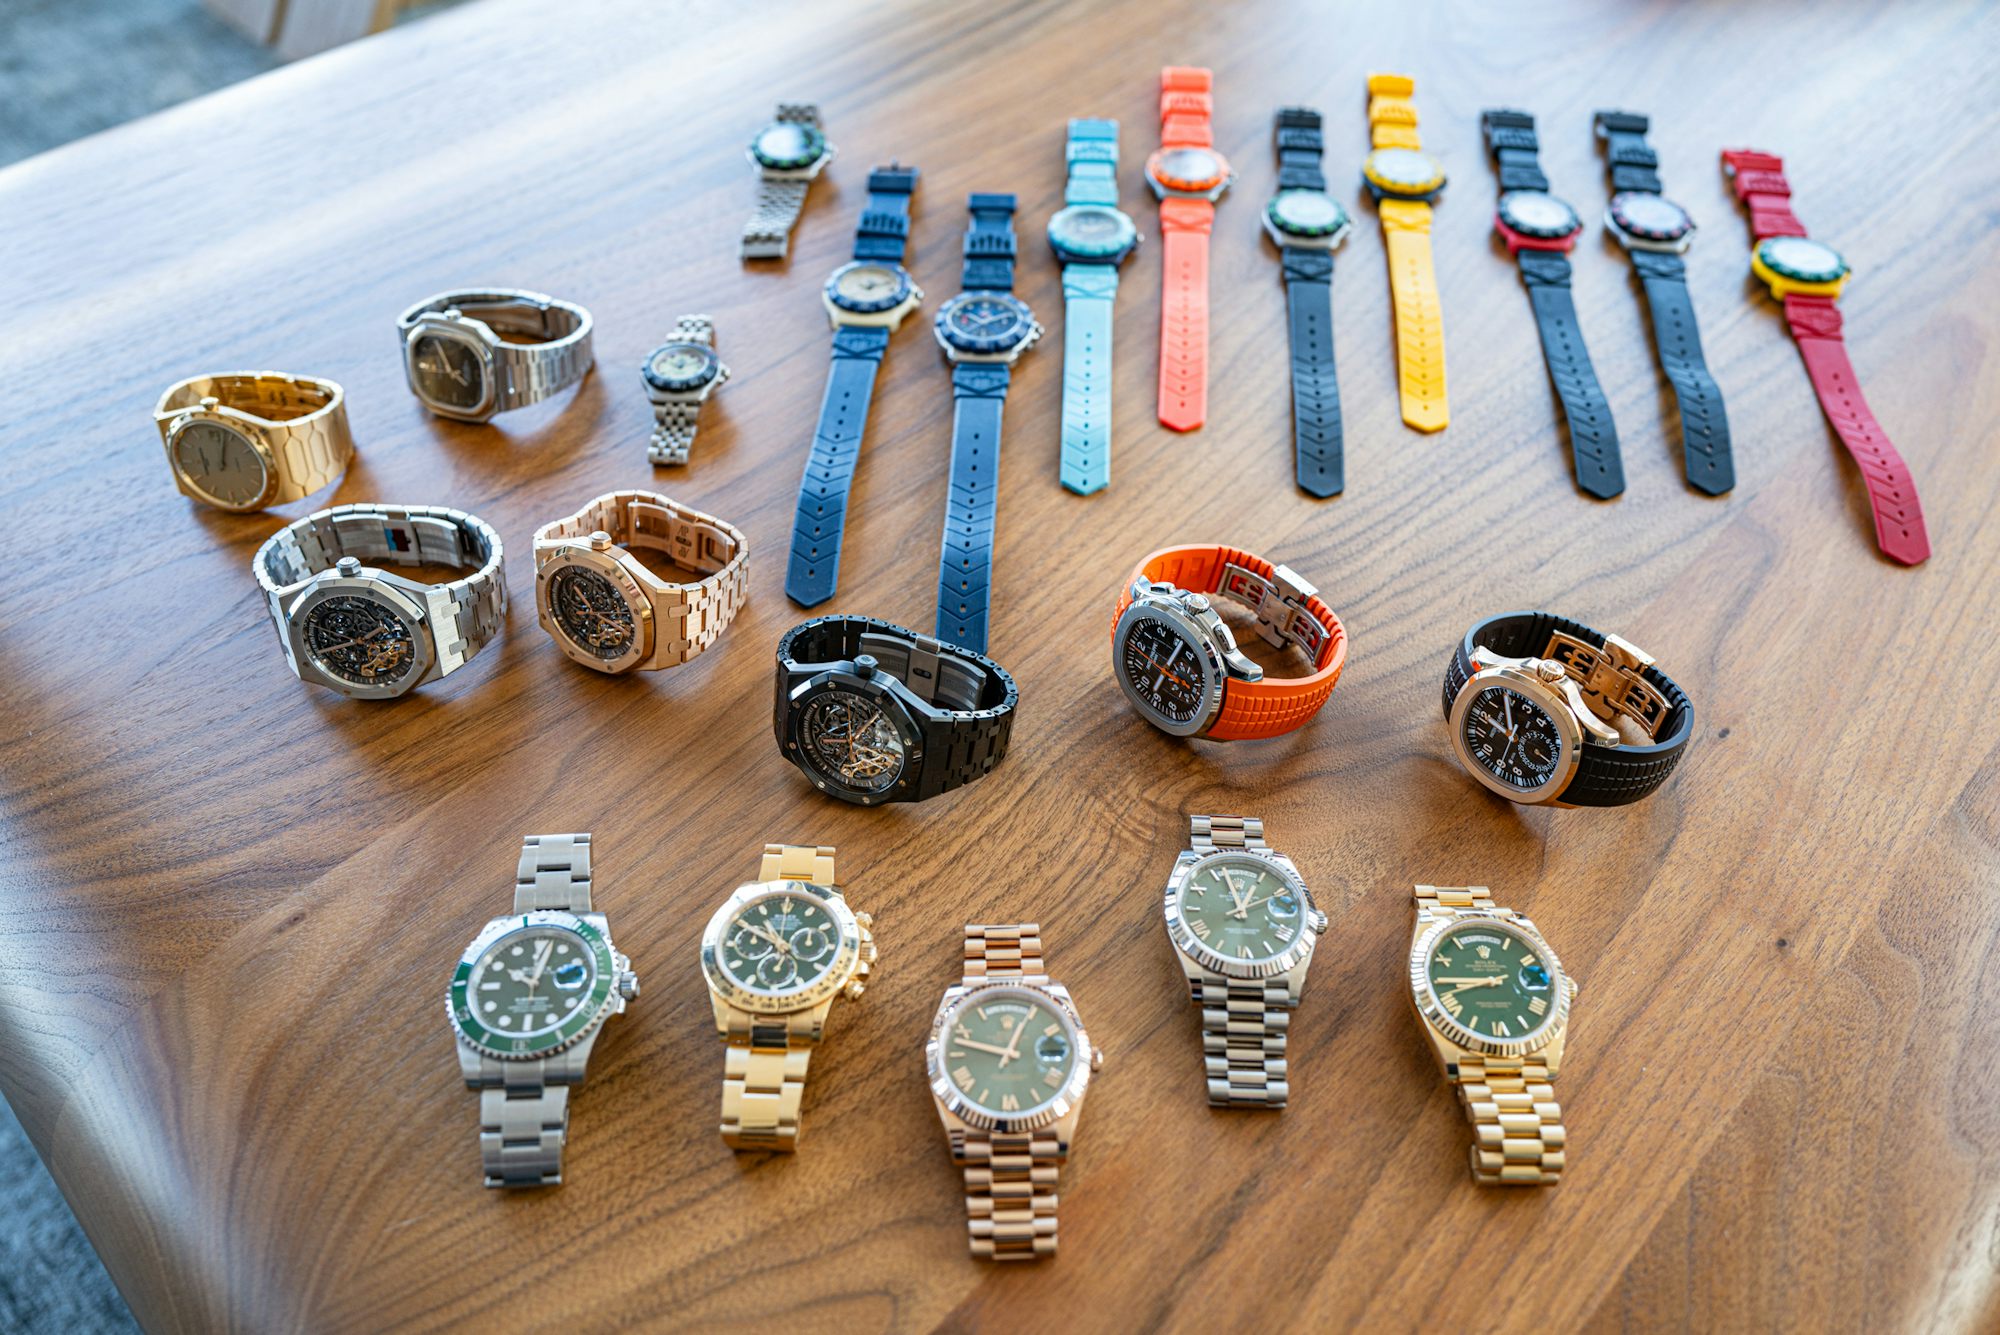 A collection of watches in different metals, colors, and designs laid out on a wooden table